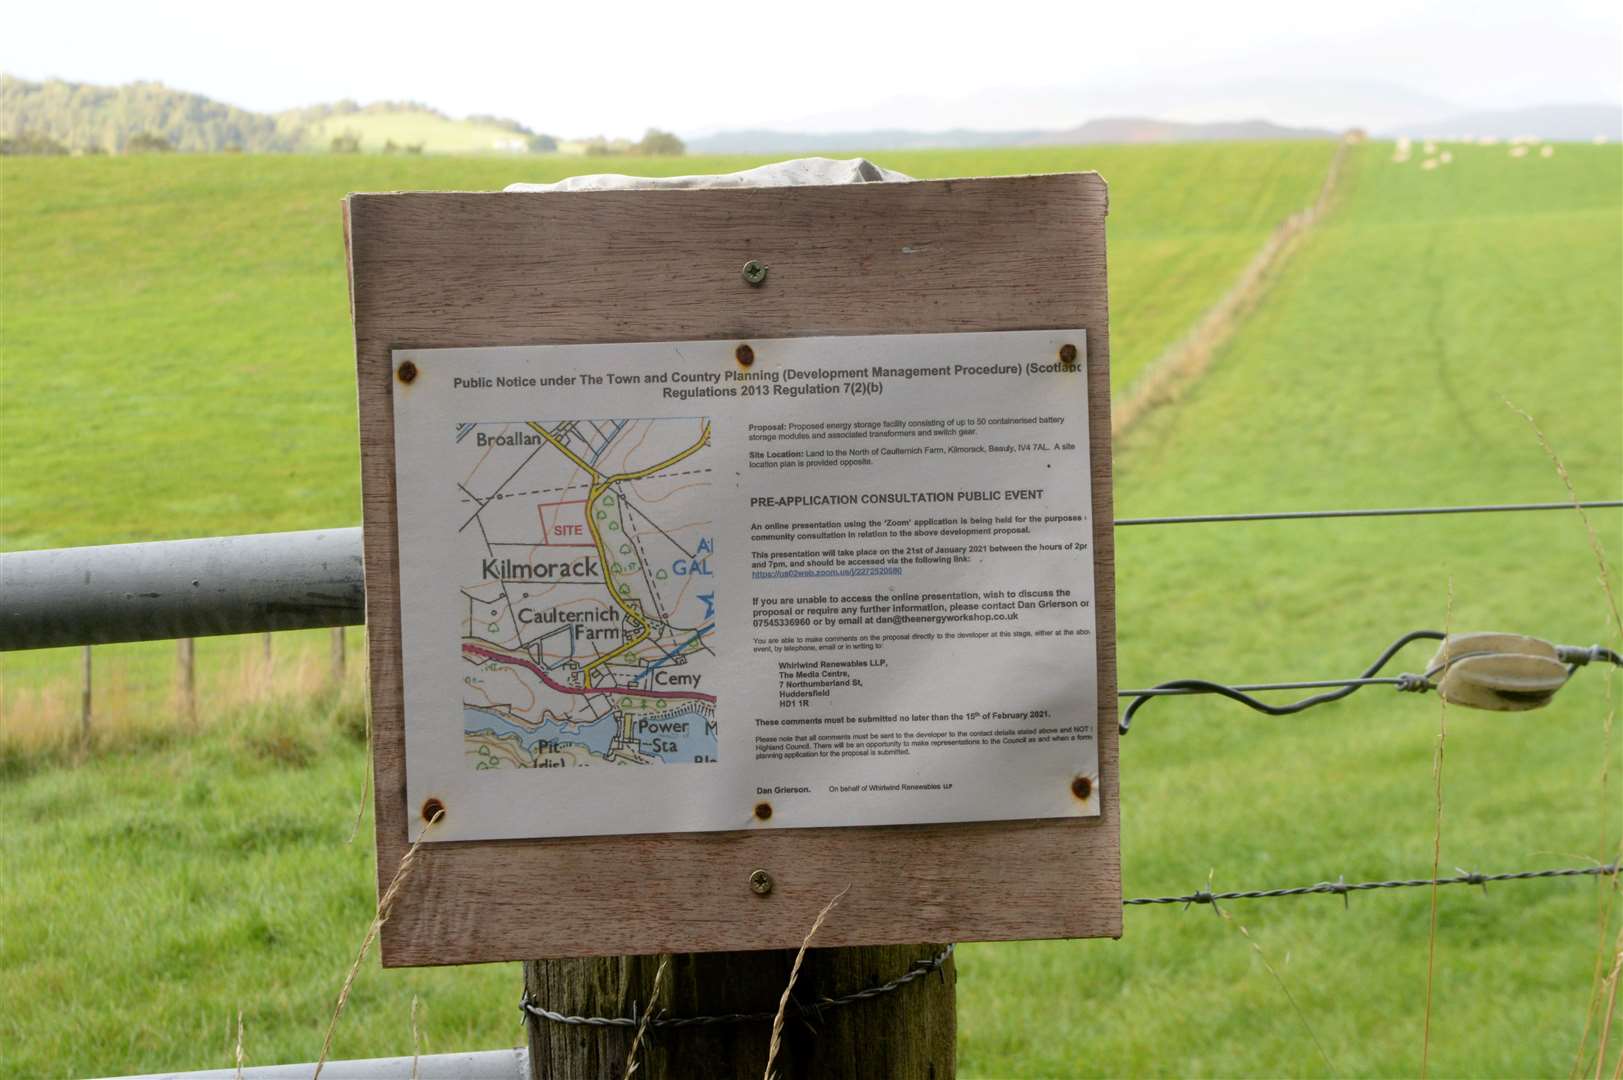 The site of proposed energy storage plant in Caulternich near Beauly.